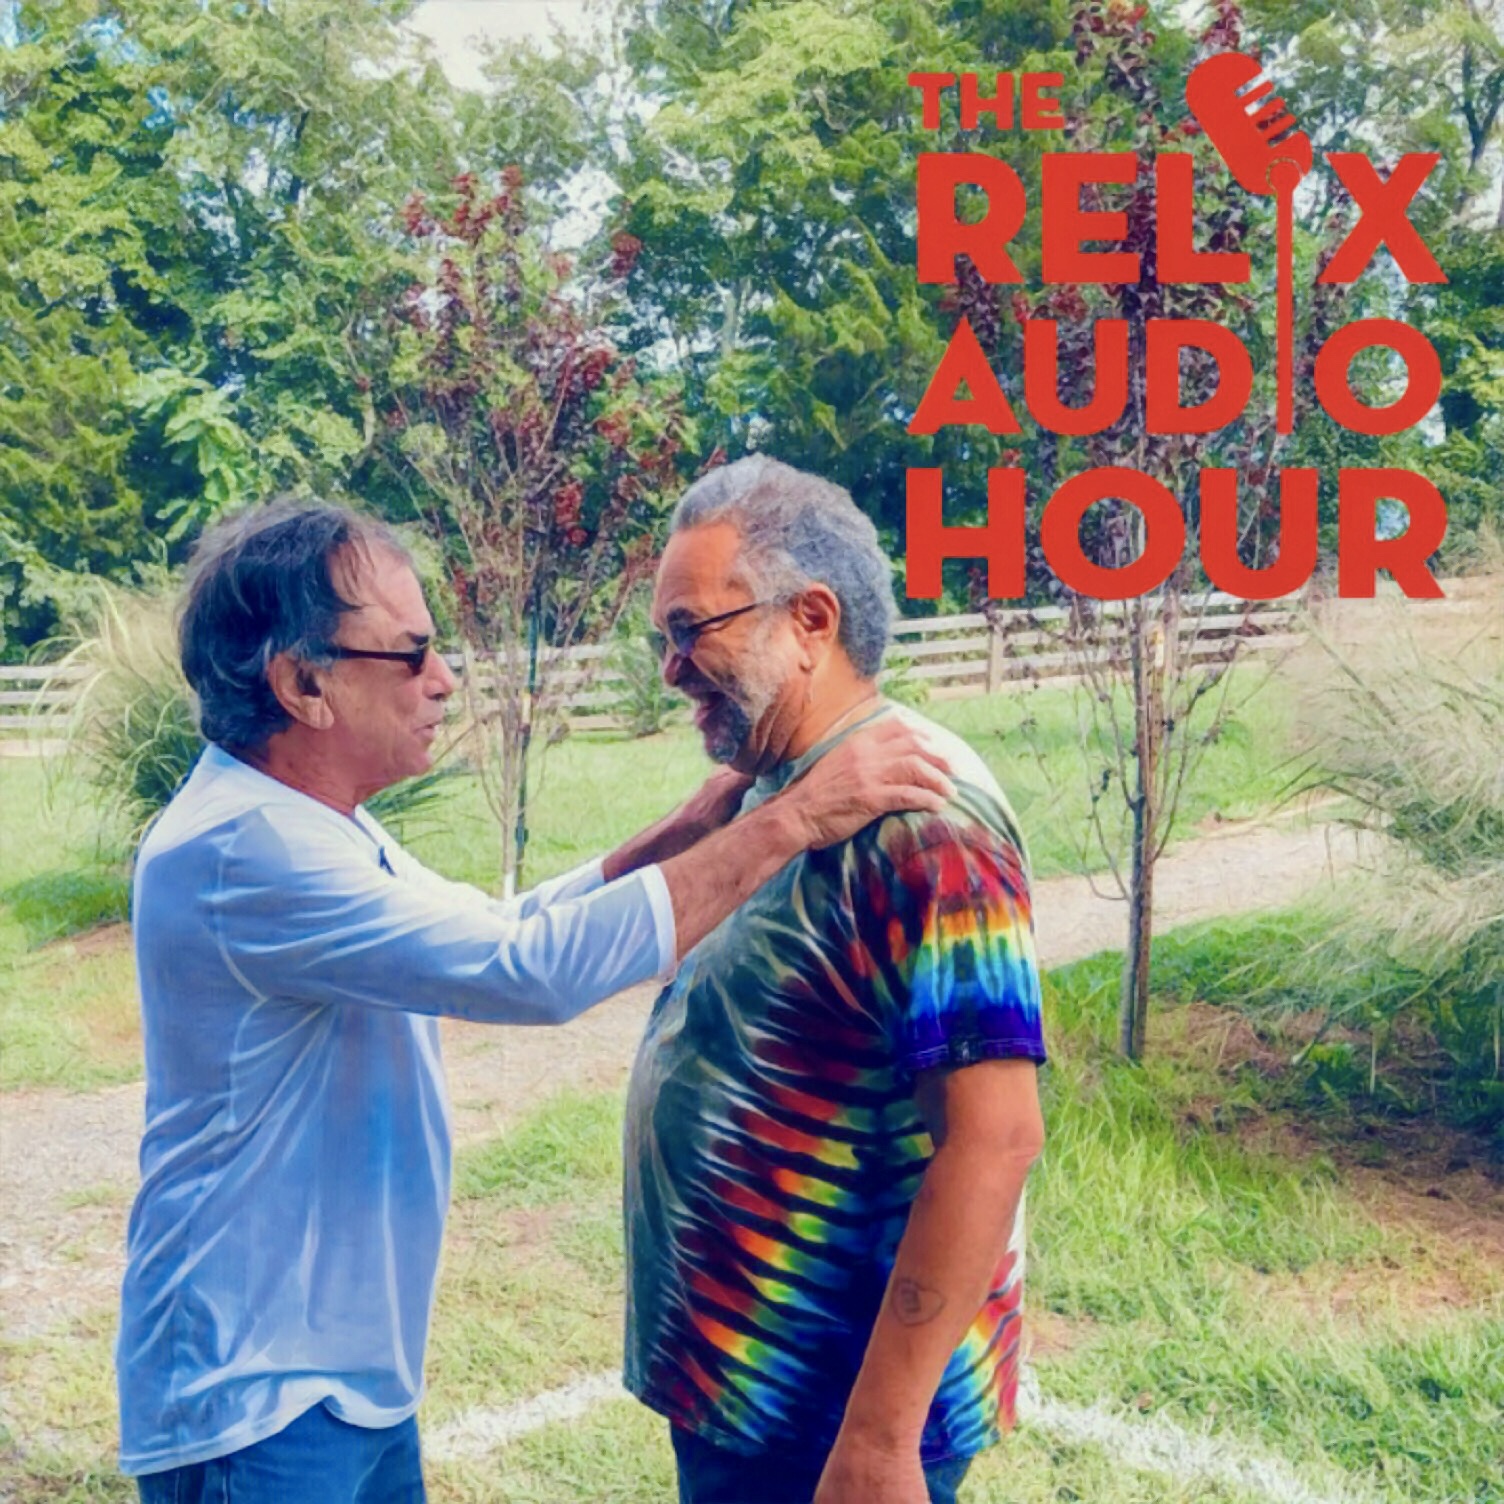 ‘The Relix Audio Hour’ Episode Five: Mickey Hart & George Porter Jr.